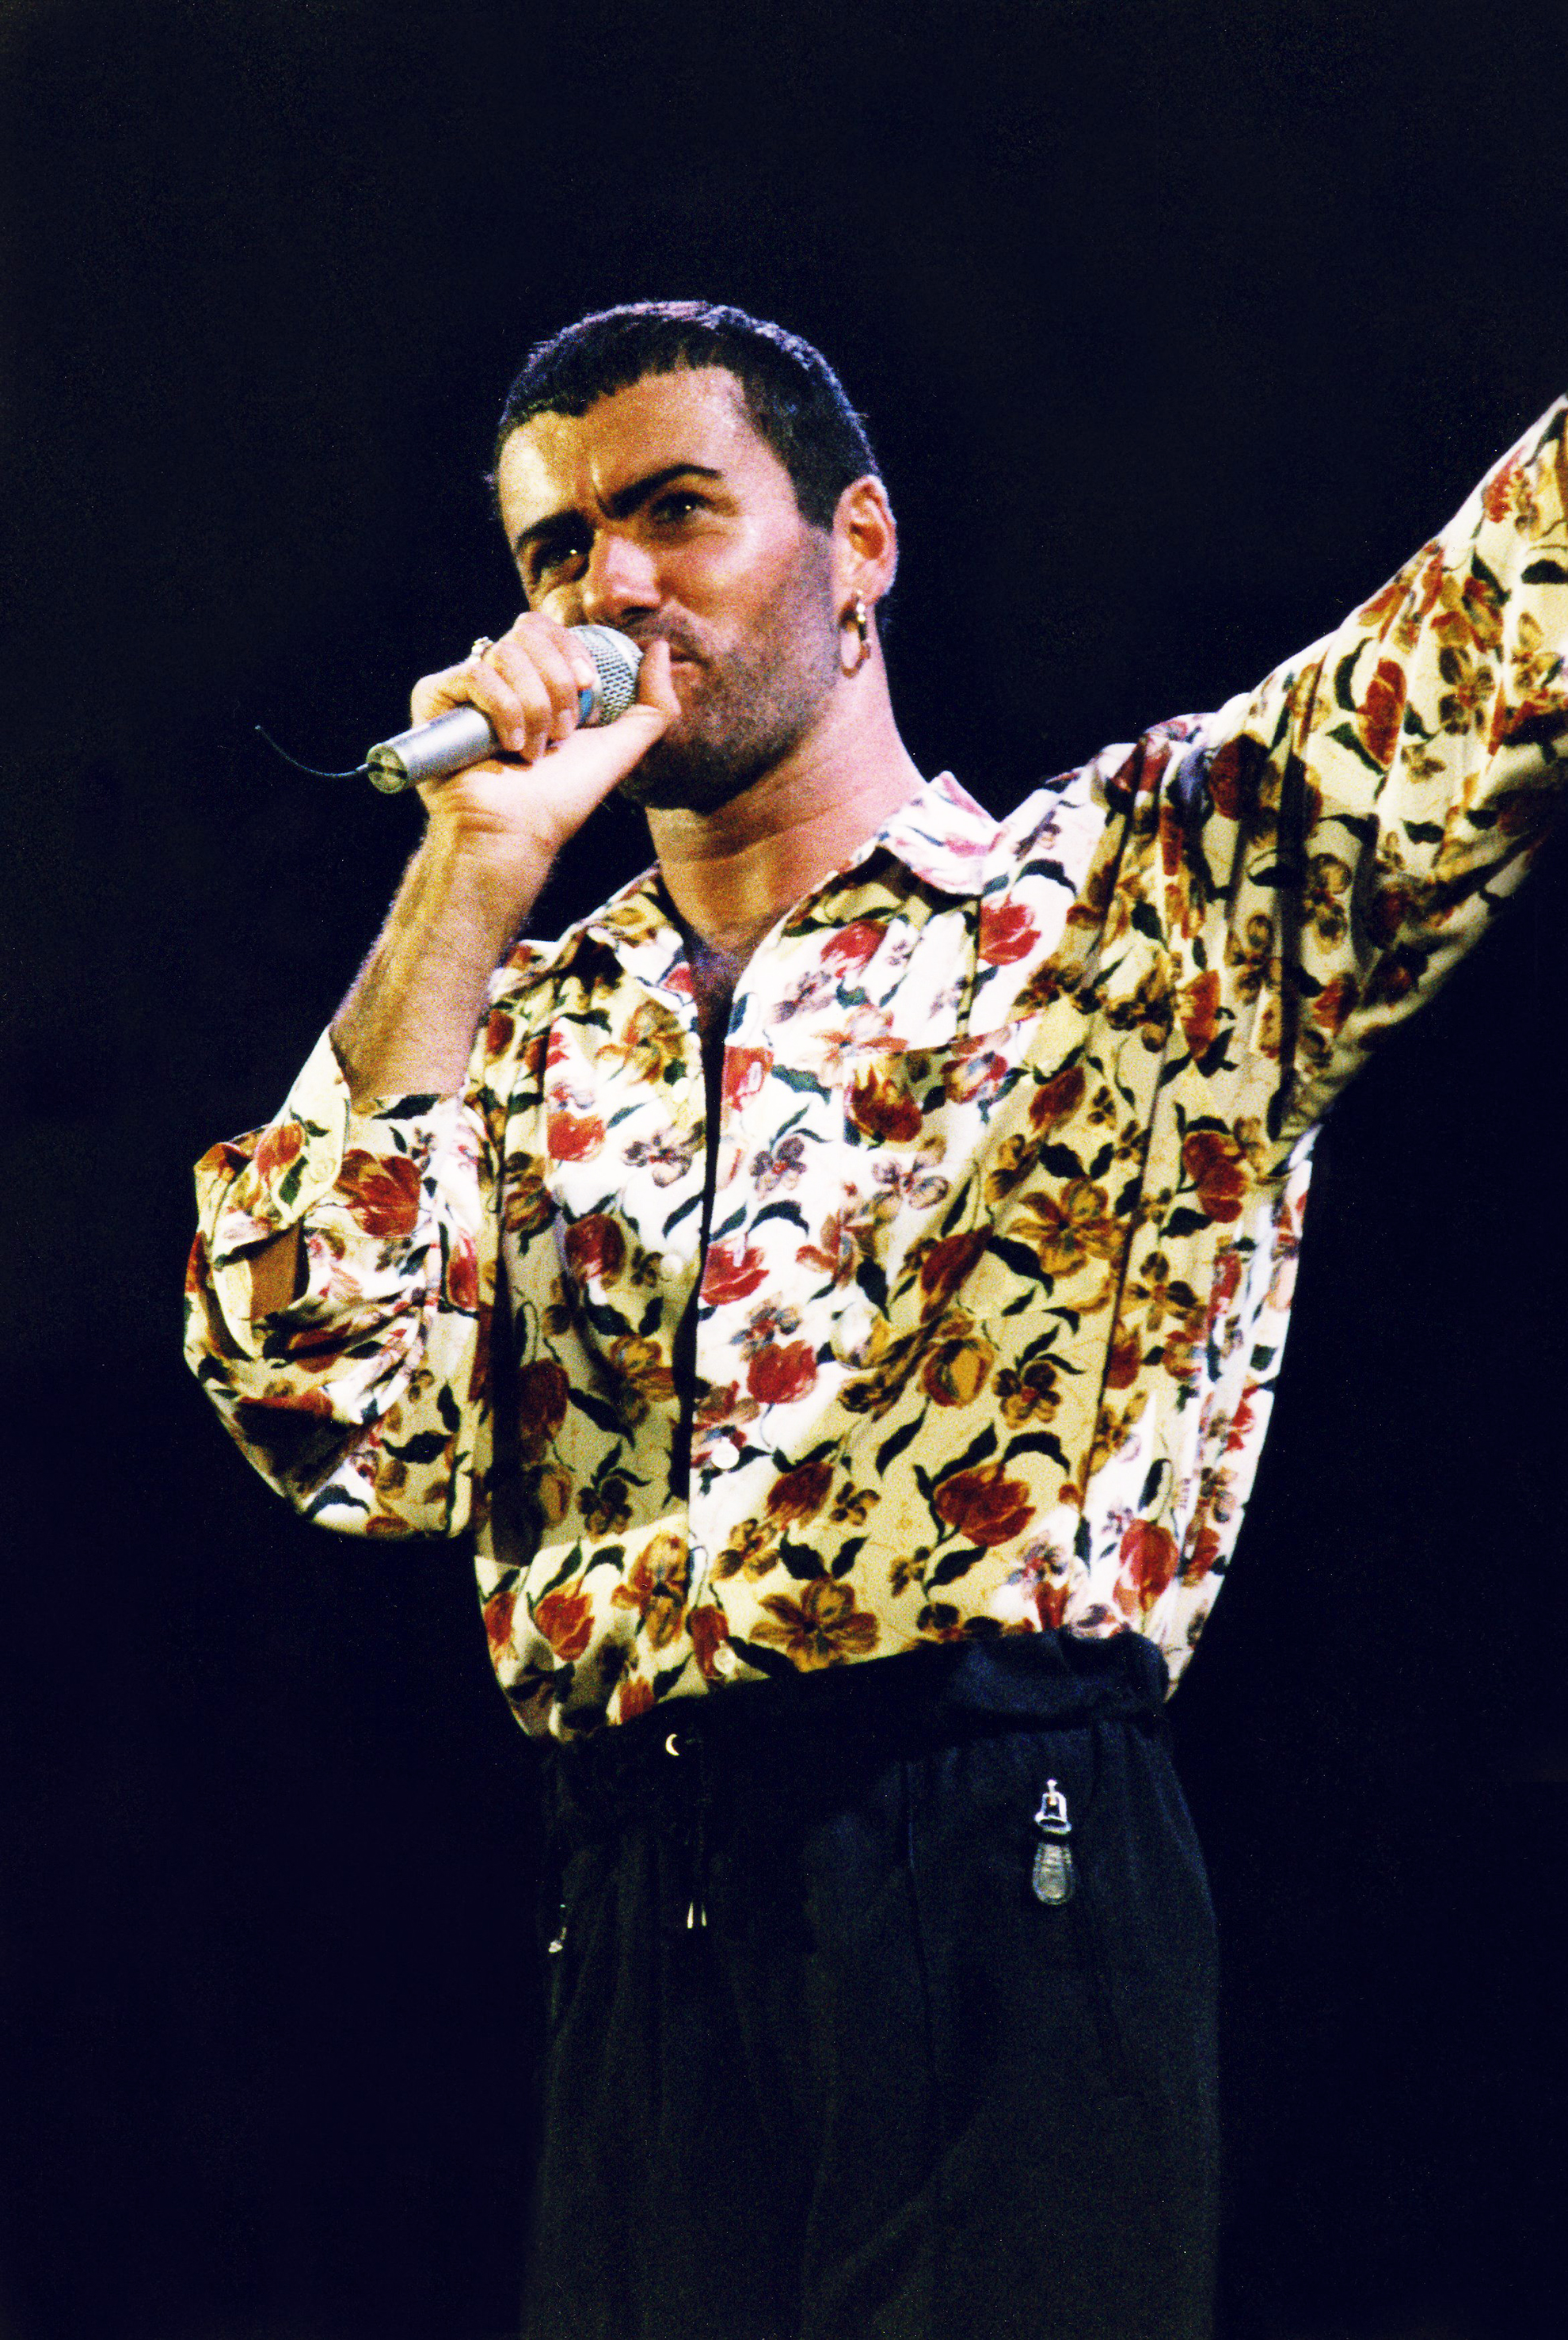 George Michael performs at Wembley Arena in London, on March 22, 1991.